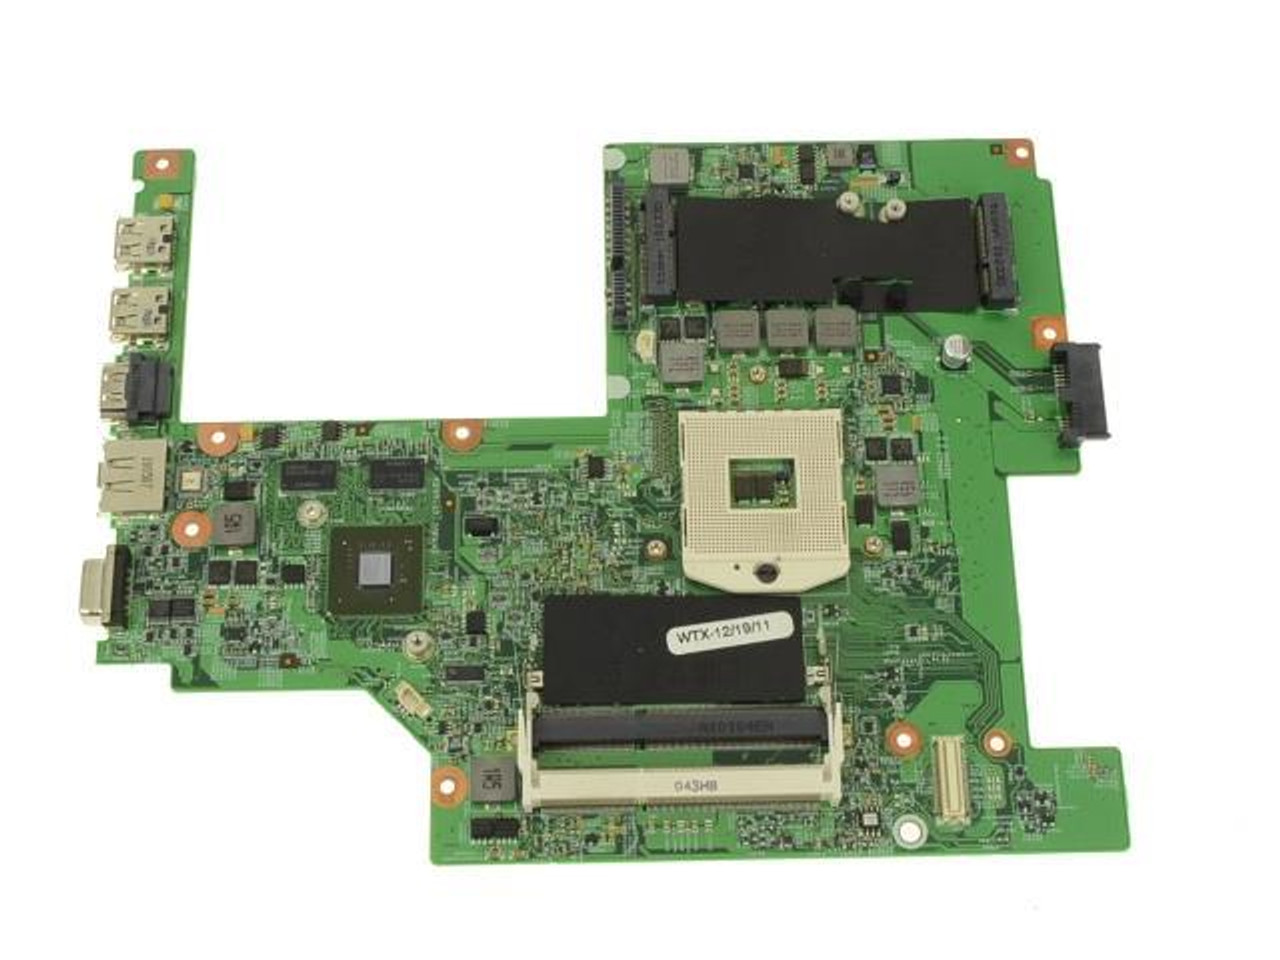 09395P Dell System Board (Motherboard) for Inspiron 3500 (Refurbished)